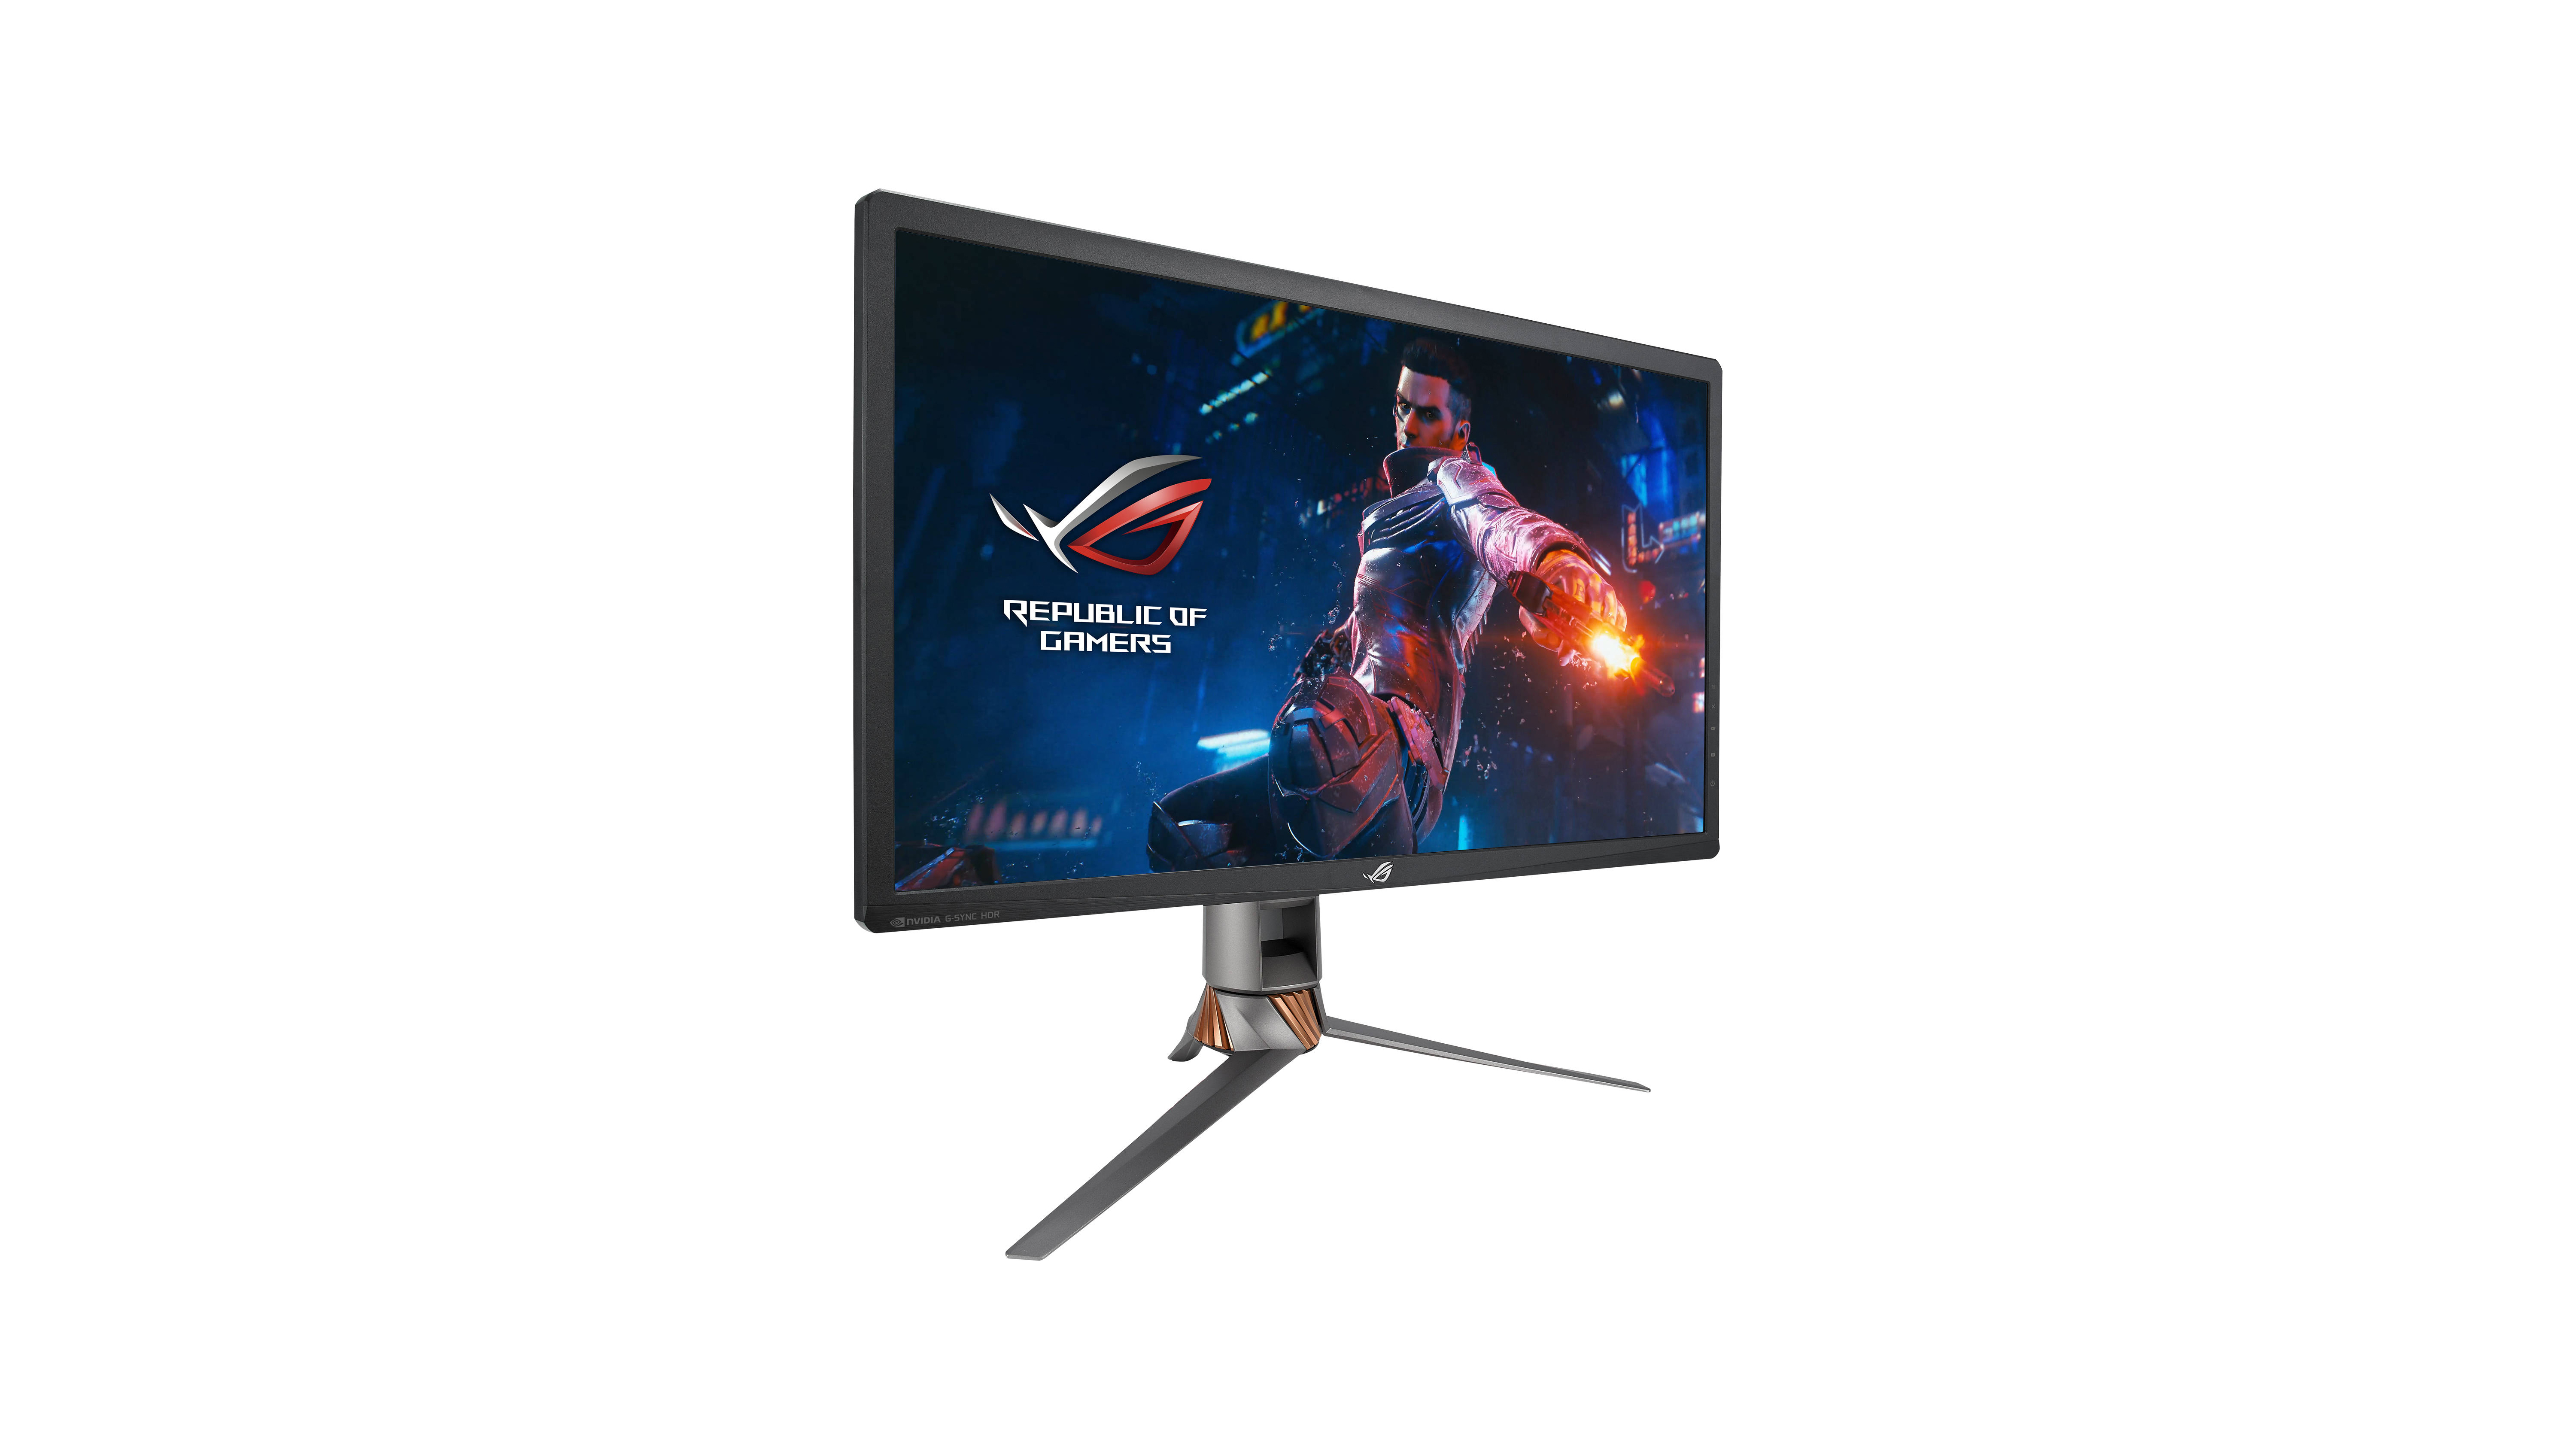 Asus ROG Swift PG27UQ at an angle on a white background